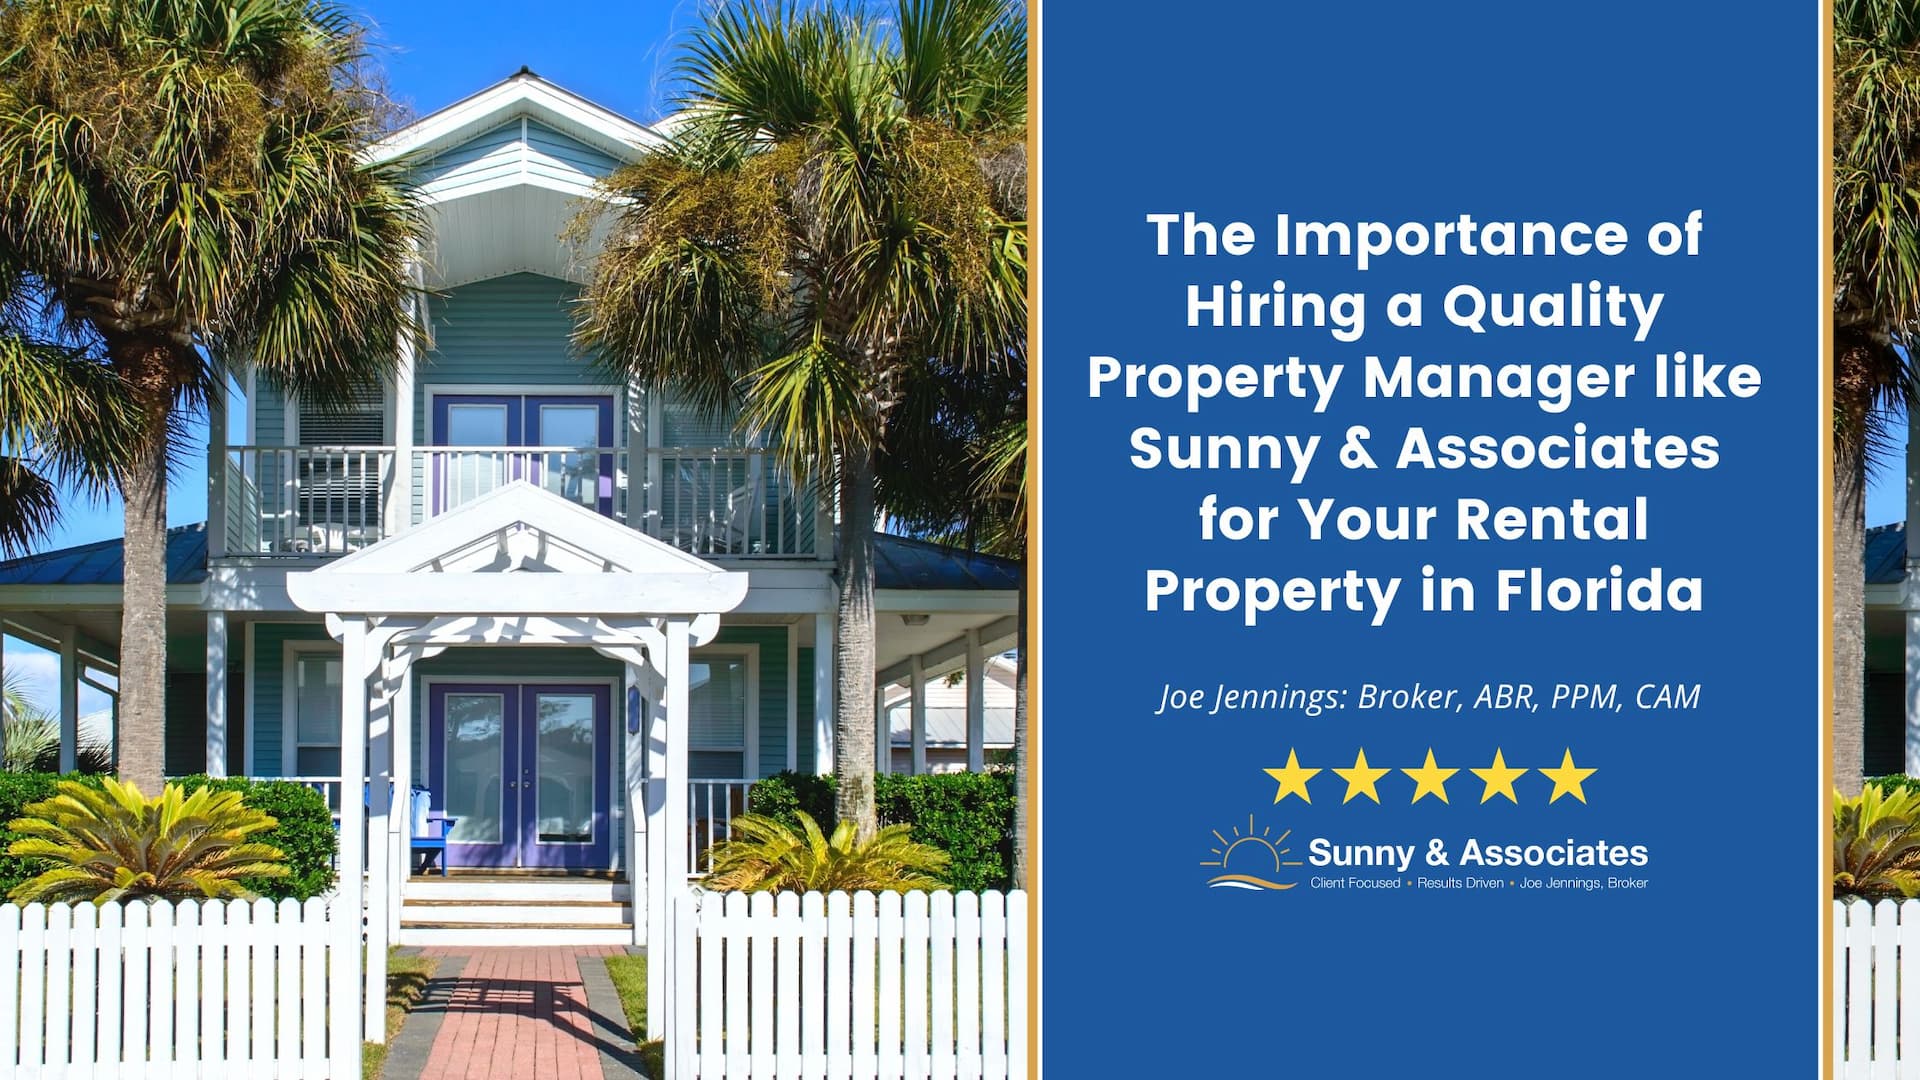 property-manager-for-your-rental-property-in-florida-sunny-associates